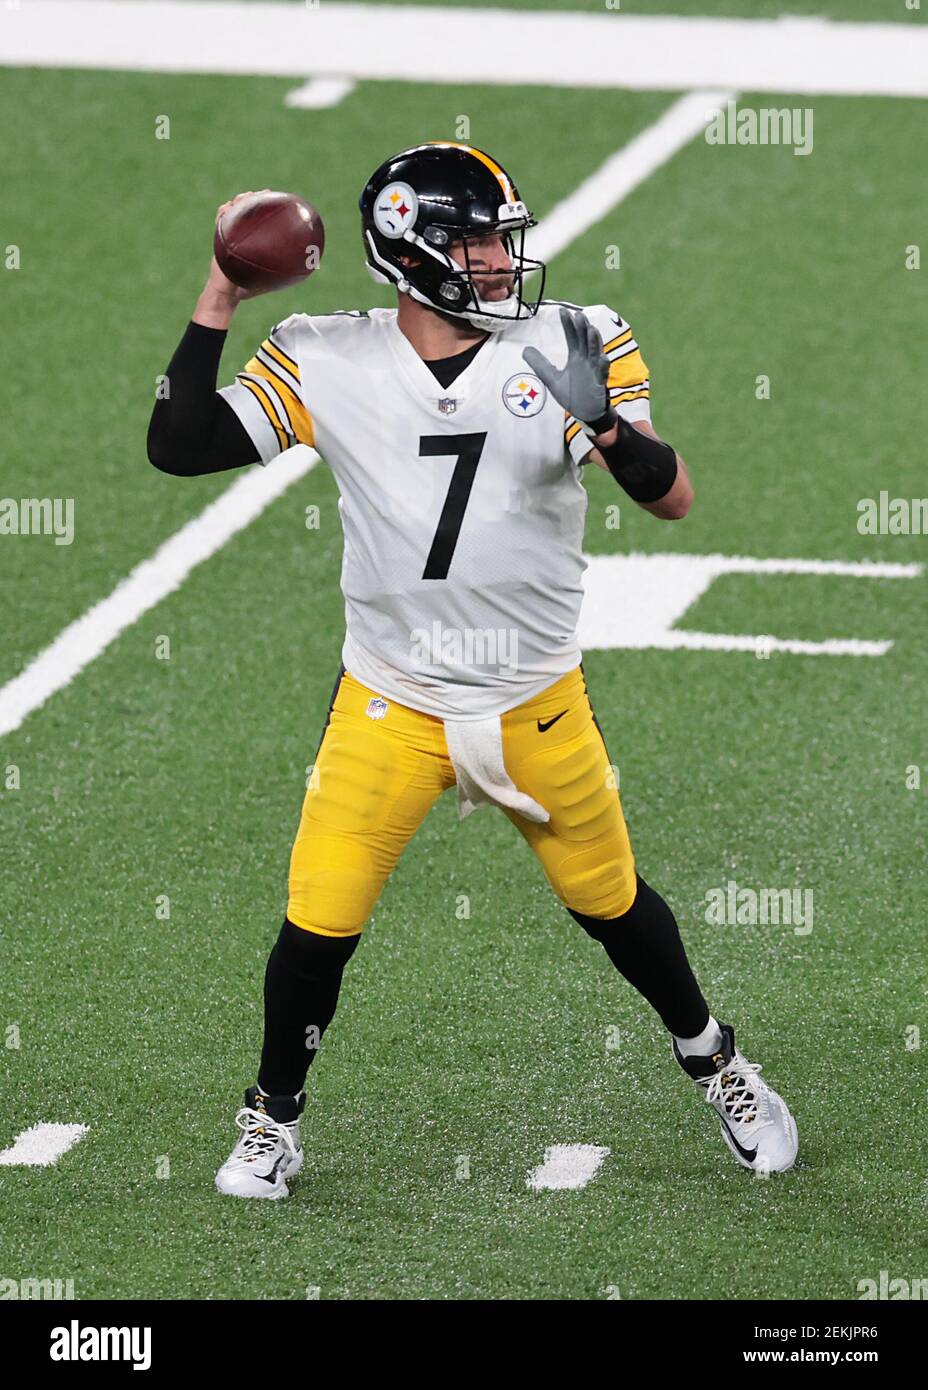 Sep 14, 2020; East Rutherford, New Jersey, USA; Pittsburgh Steelers  quarterback Ben Roethlisberger (7) throws the ball during the first half  against the New York Giants at MetLife Stadium. Mandatory Credit: Vincent